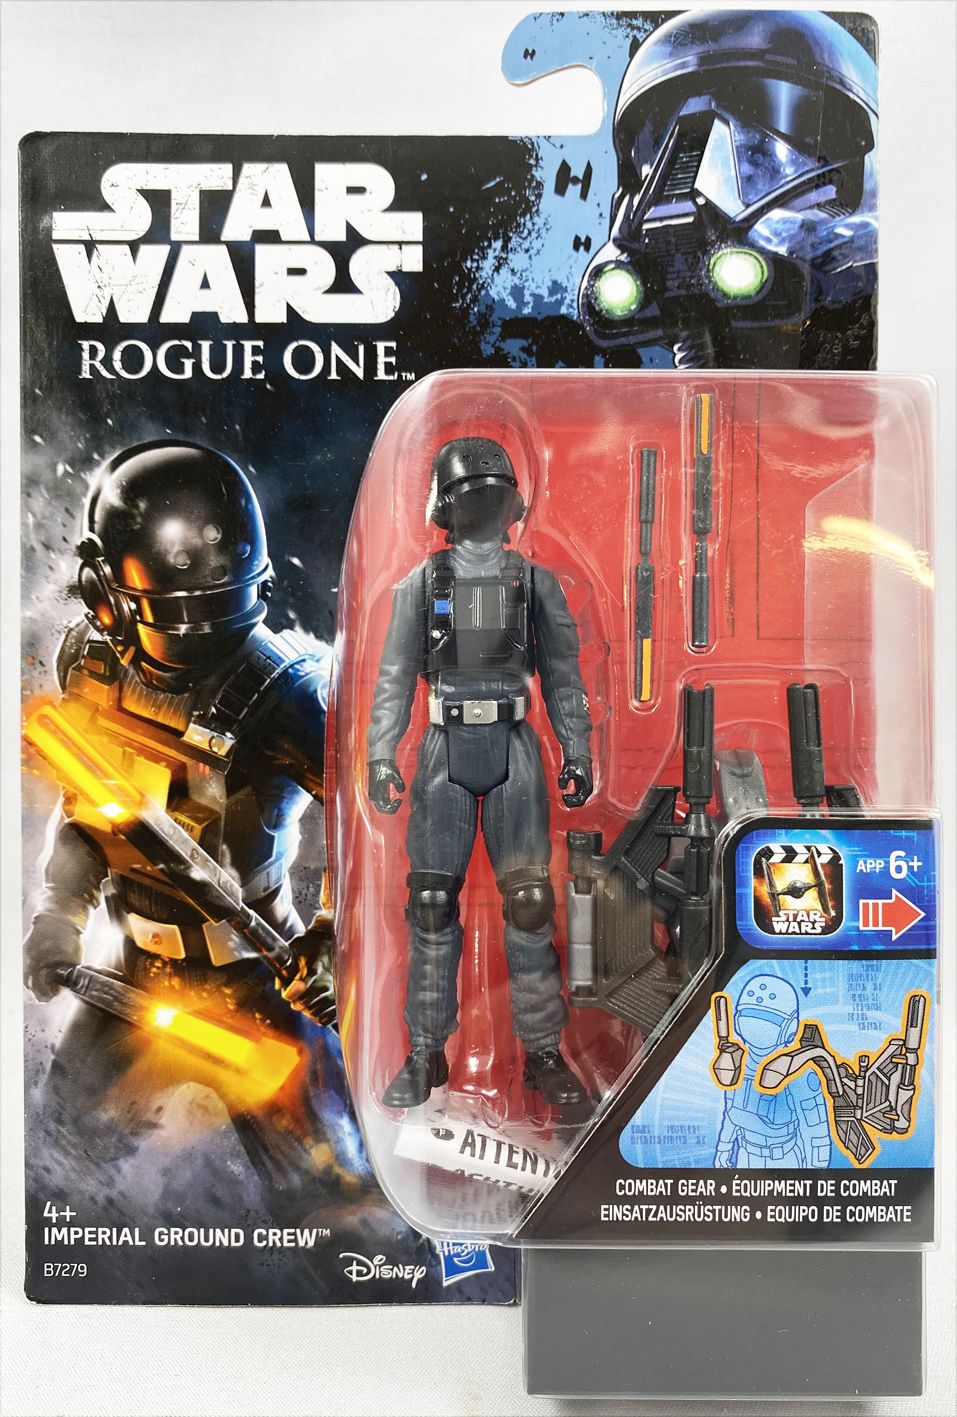 B7279 Star Wars Rogue One Imperial Ground Crew 3.75" FIGURE by Hasbro 